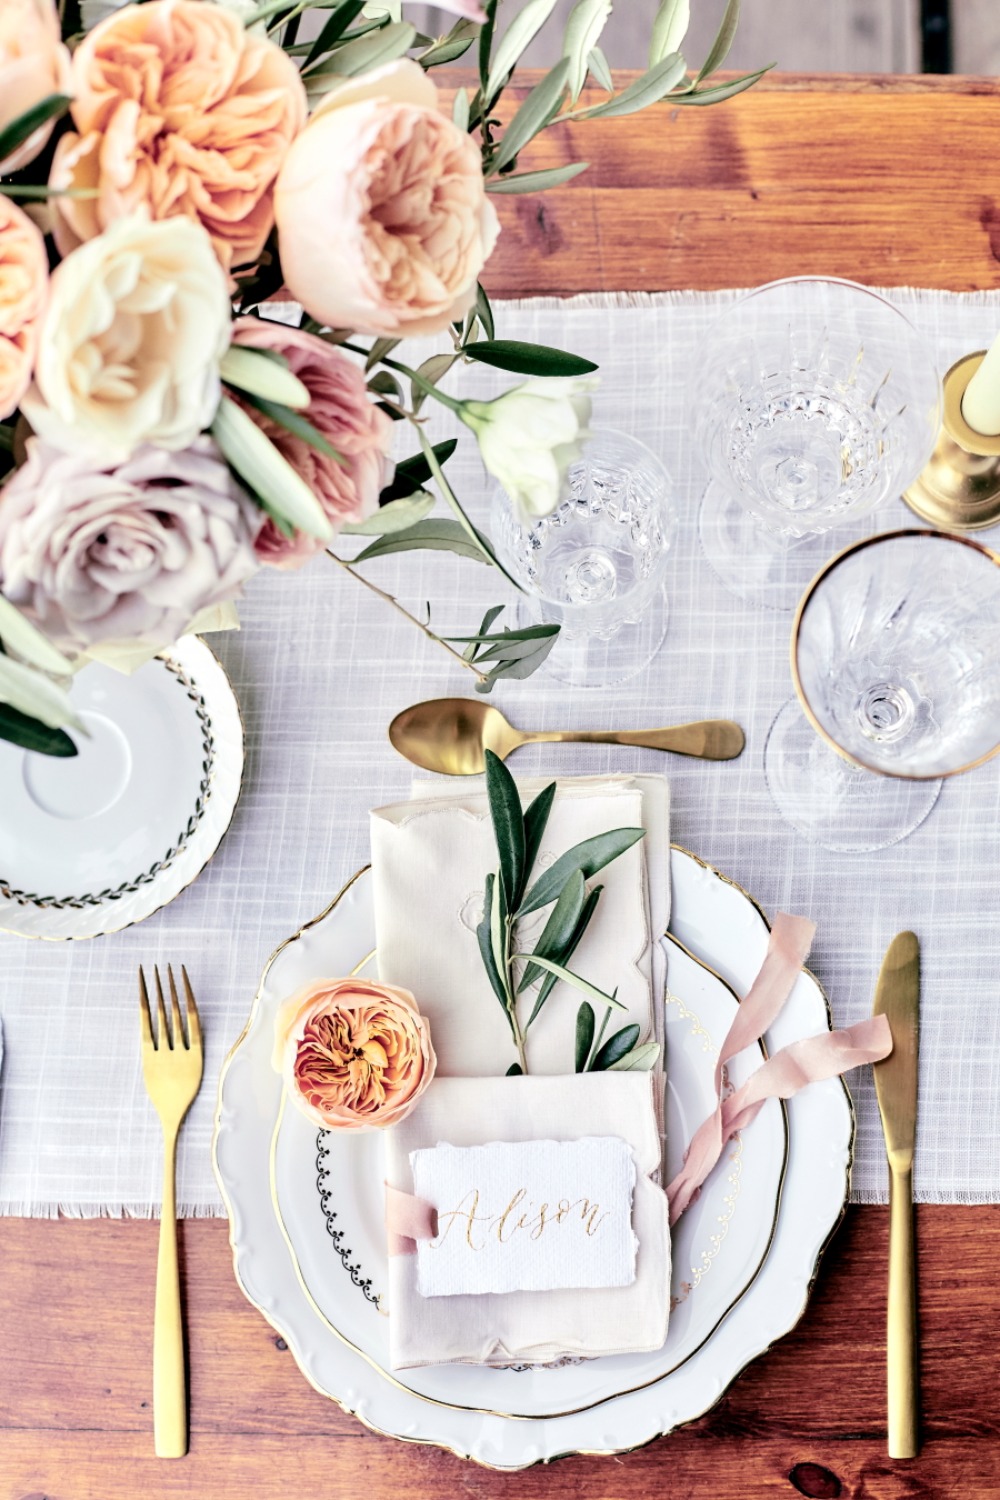 Elegant place setting for a wedding